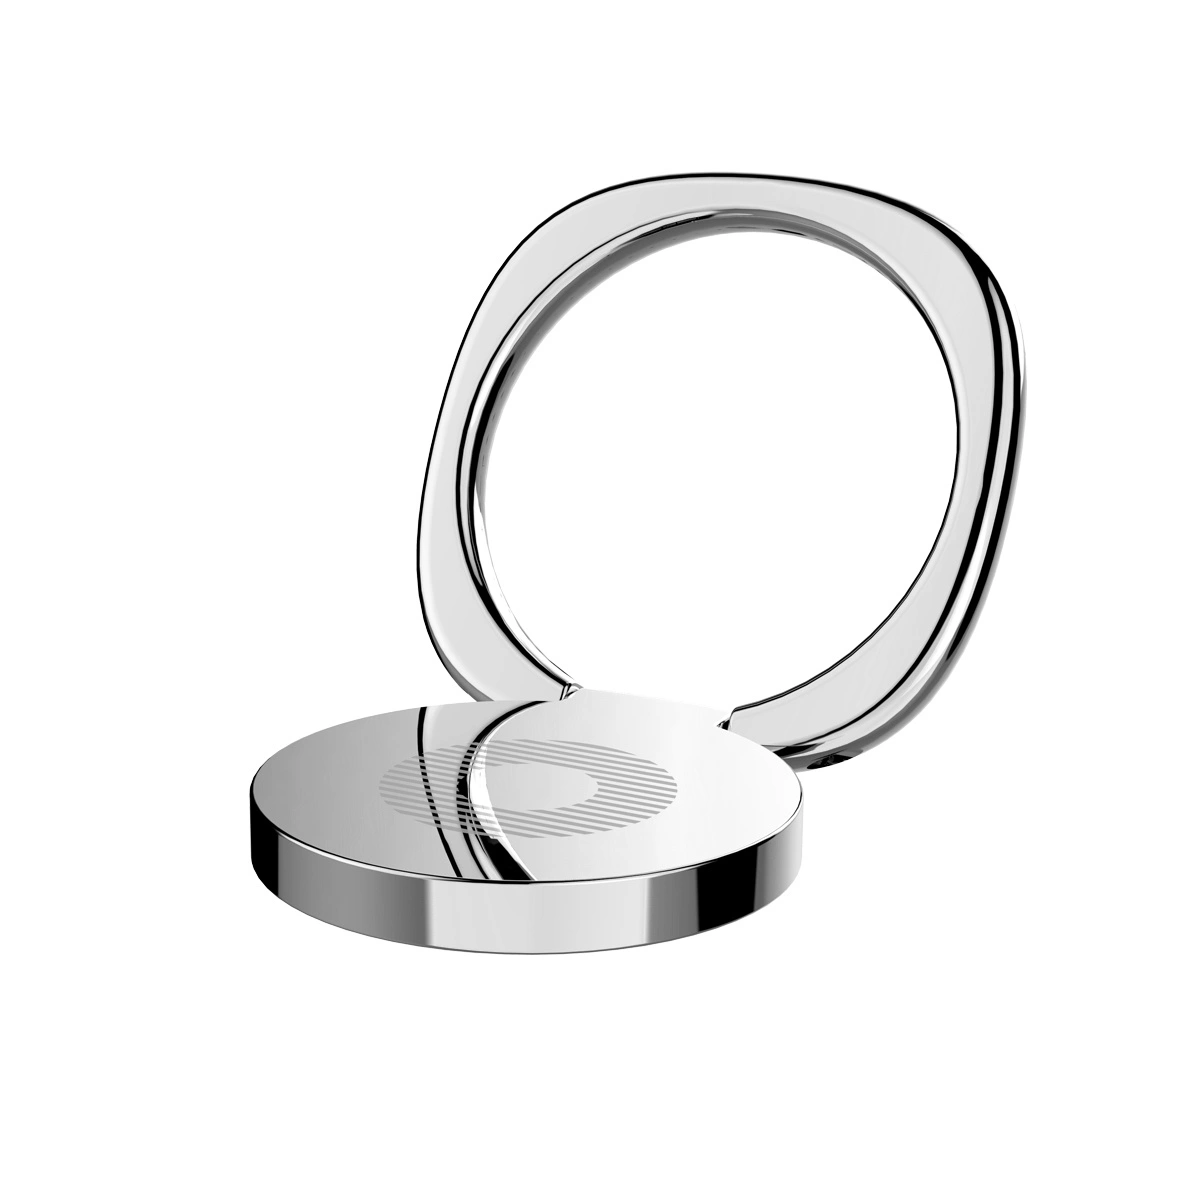 Silver Baseus Privity Ring holder with stand function on a white background